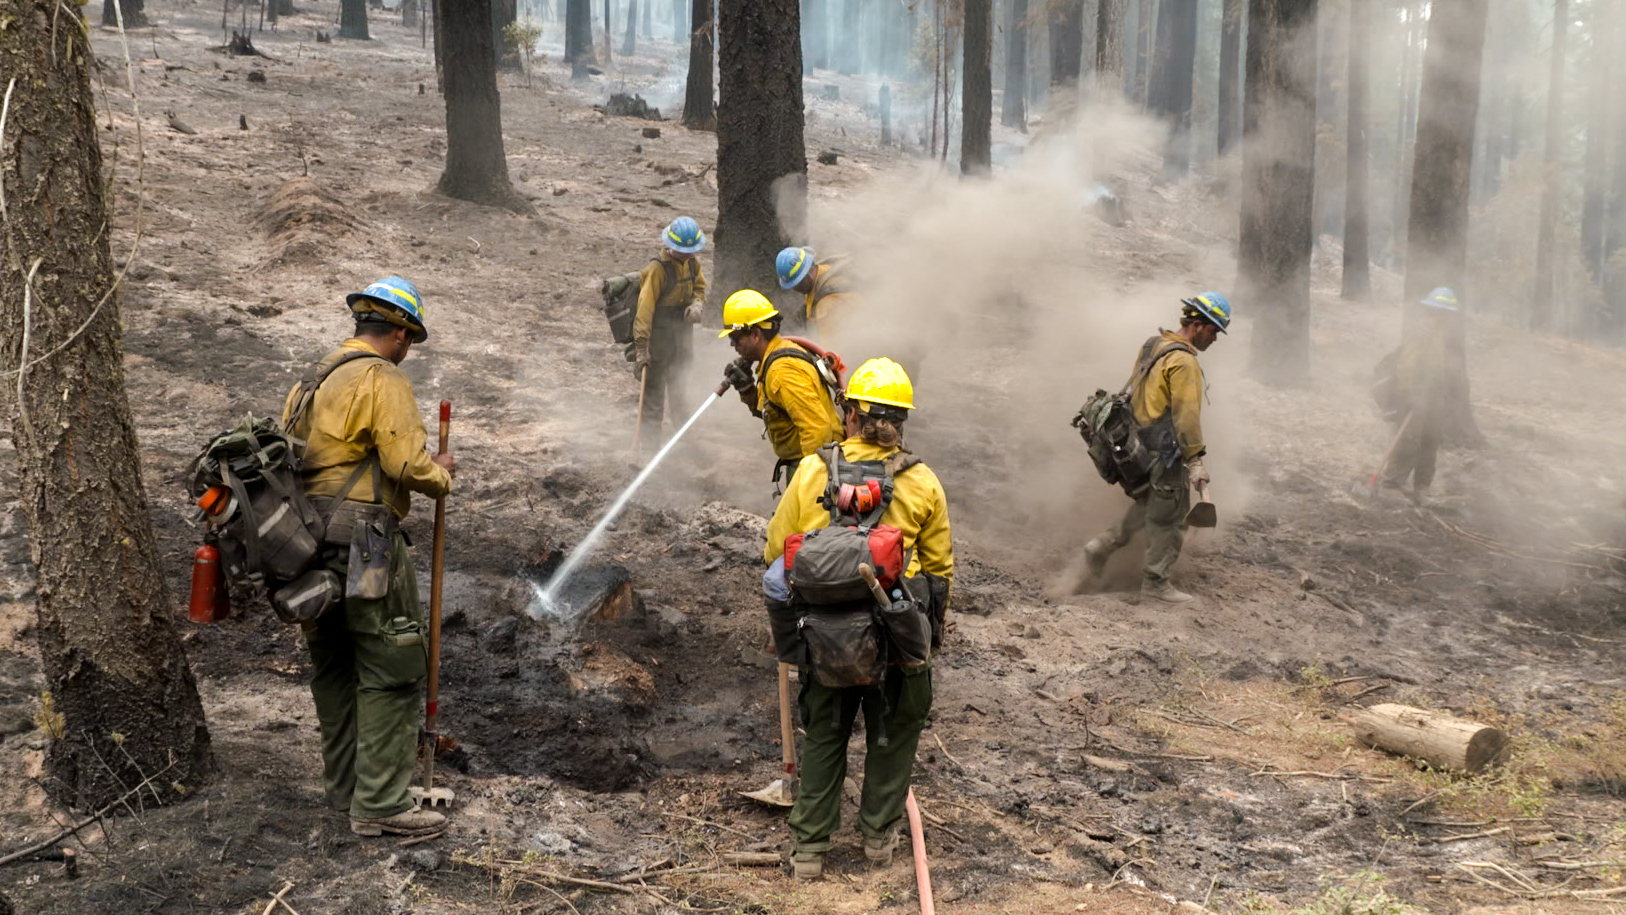 Wildland firefighting corpsmembers working together